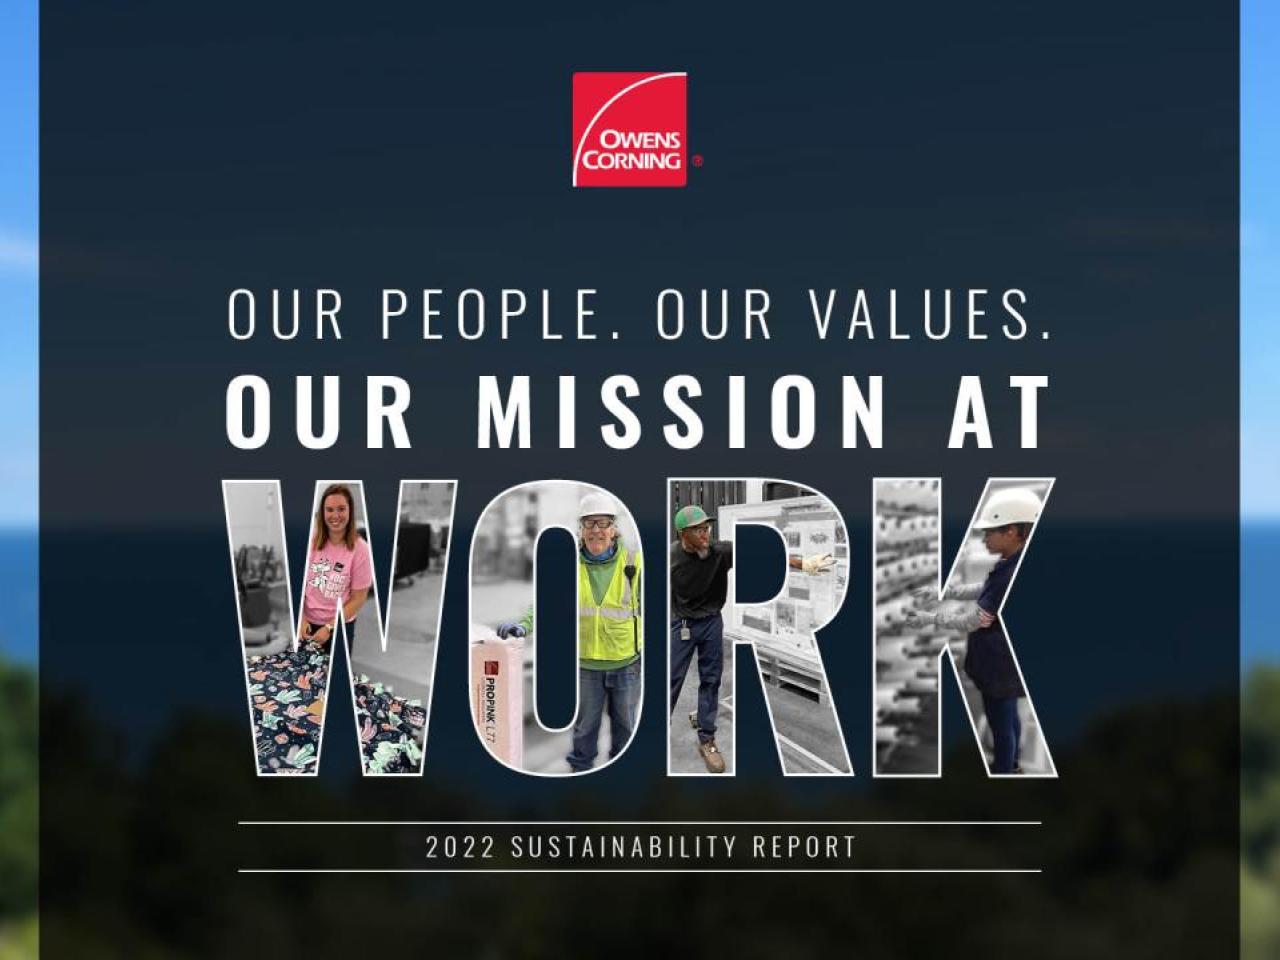 "Our people. our Values. Our Mission at Work. 2022 Sustainability Report"